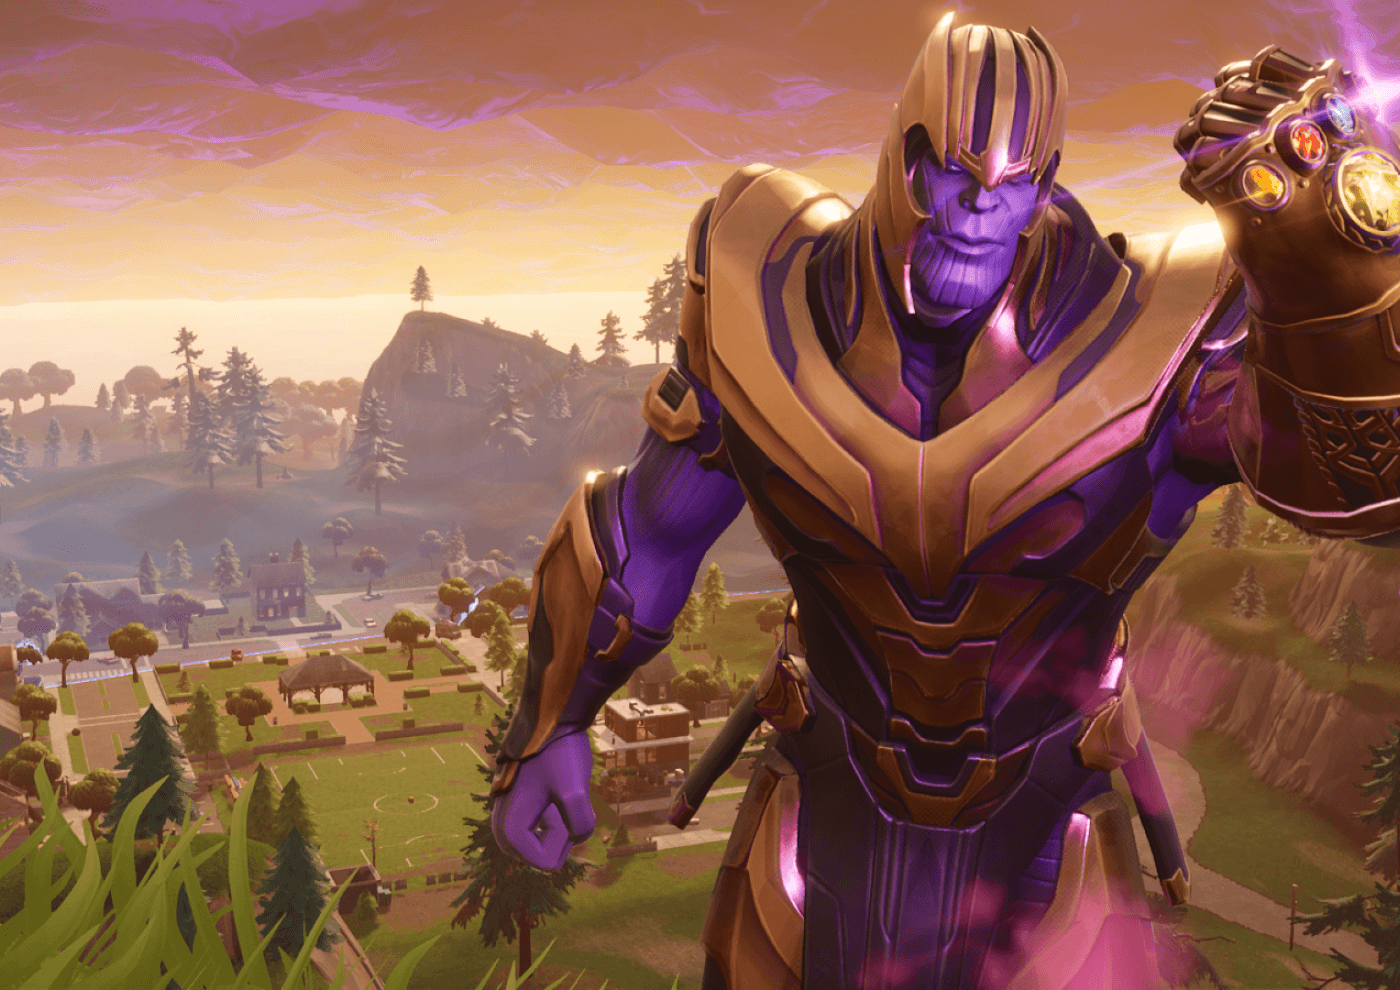 download 1400x990 fortnite thanos wallpapers wallpapermaiden - fortnite thanos mode download